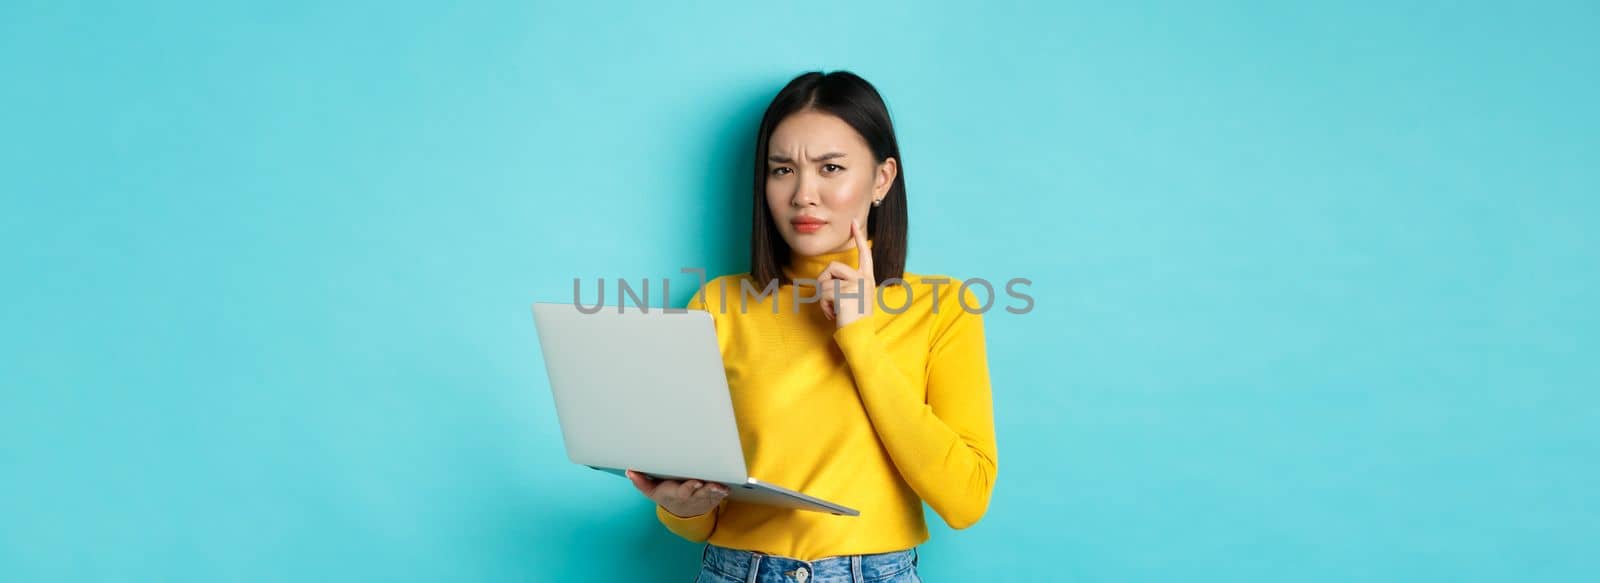 Serious looking asian woman working on laptop and thinking, frowning at camera, solving problem at work, standing over blue background.